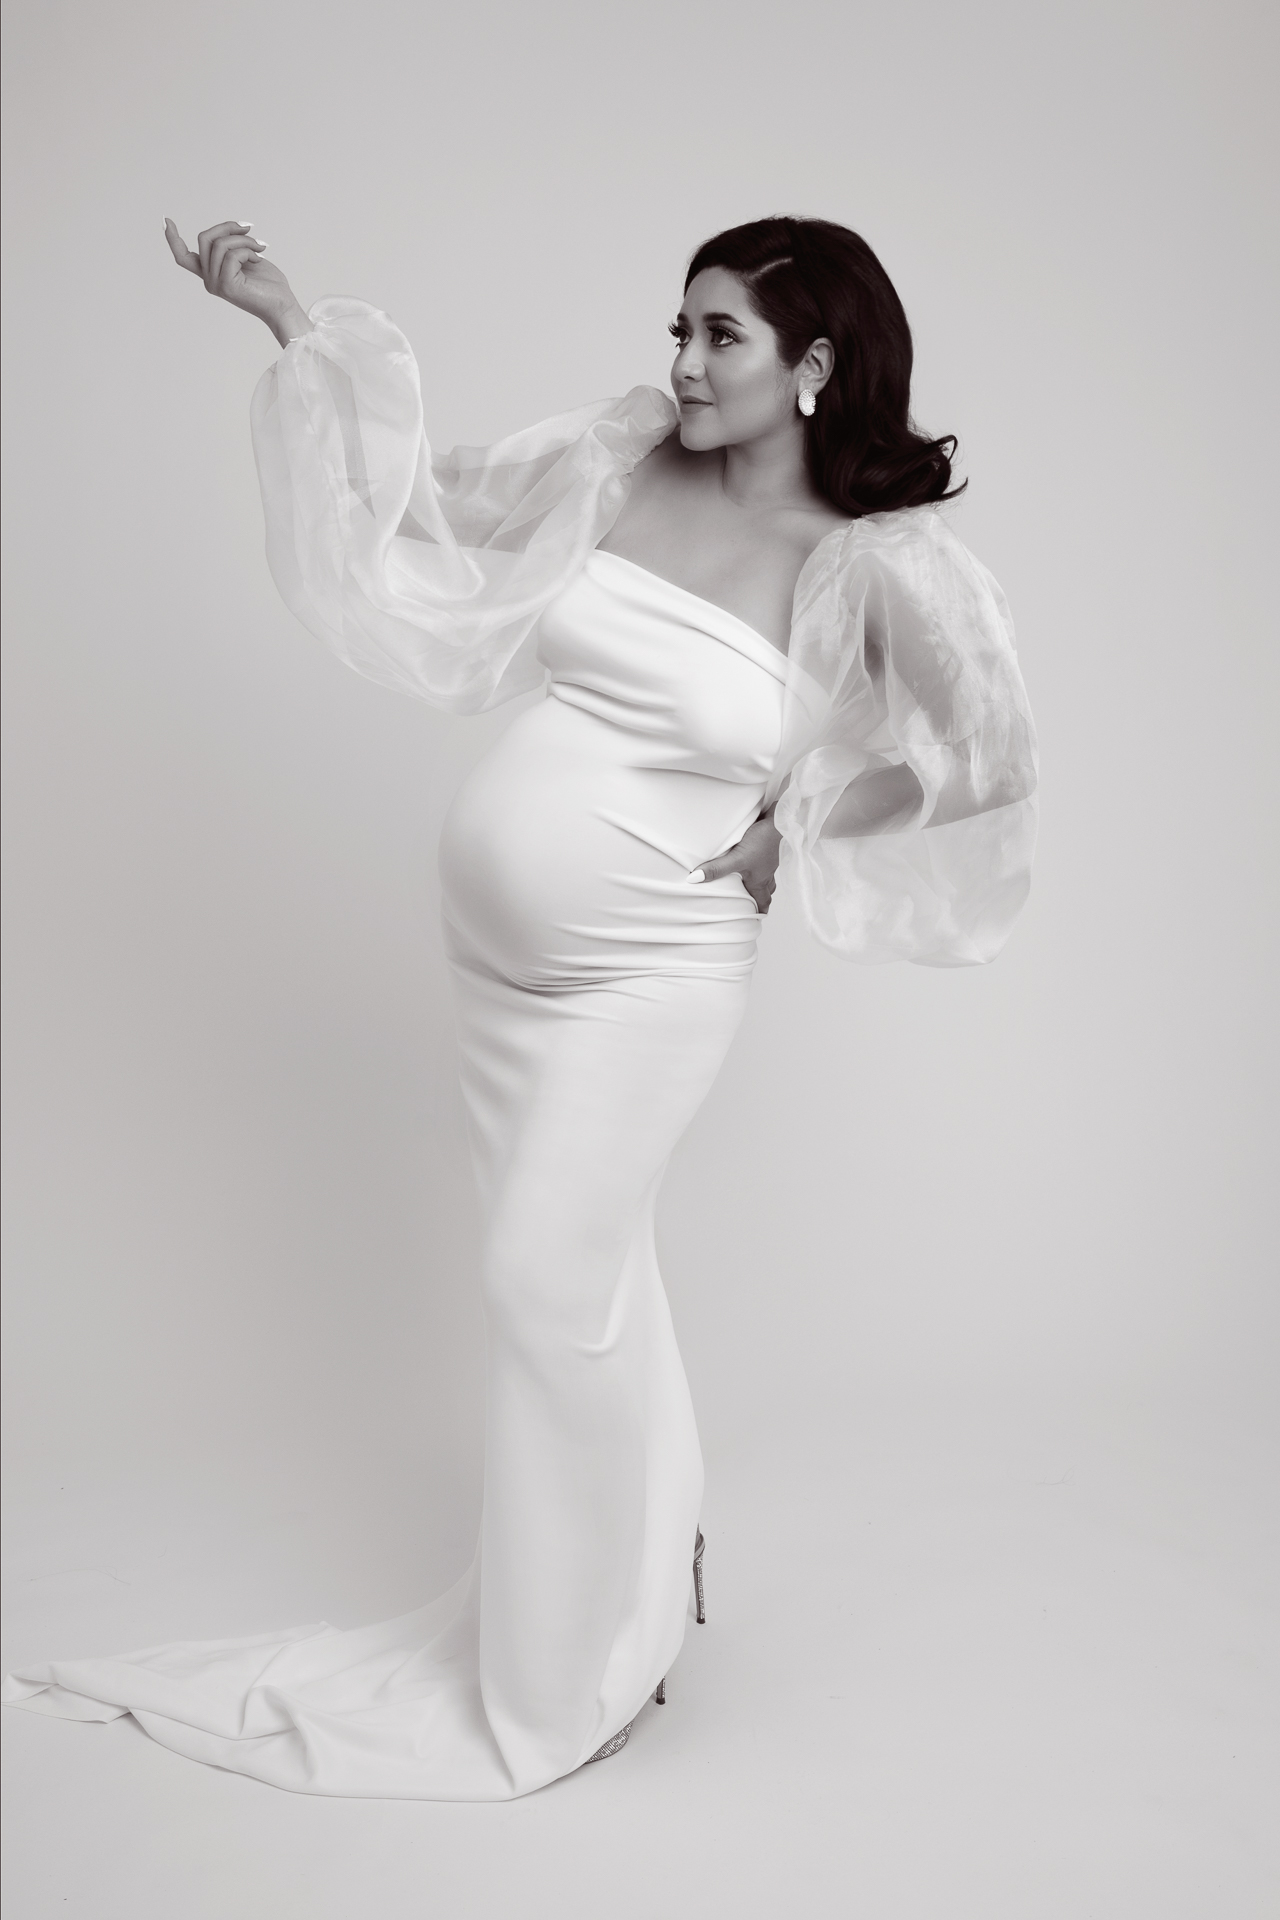 Pregnant, dark hair woman wears white dress and high heels, white backdrop, black and white image